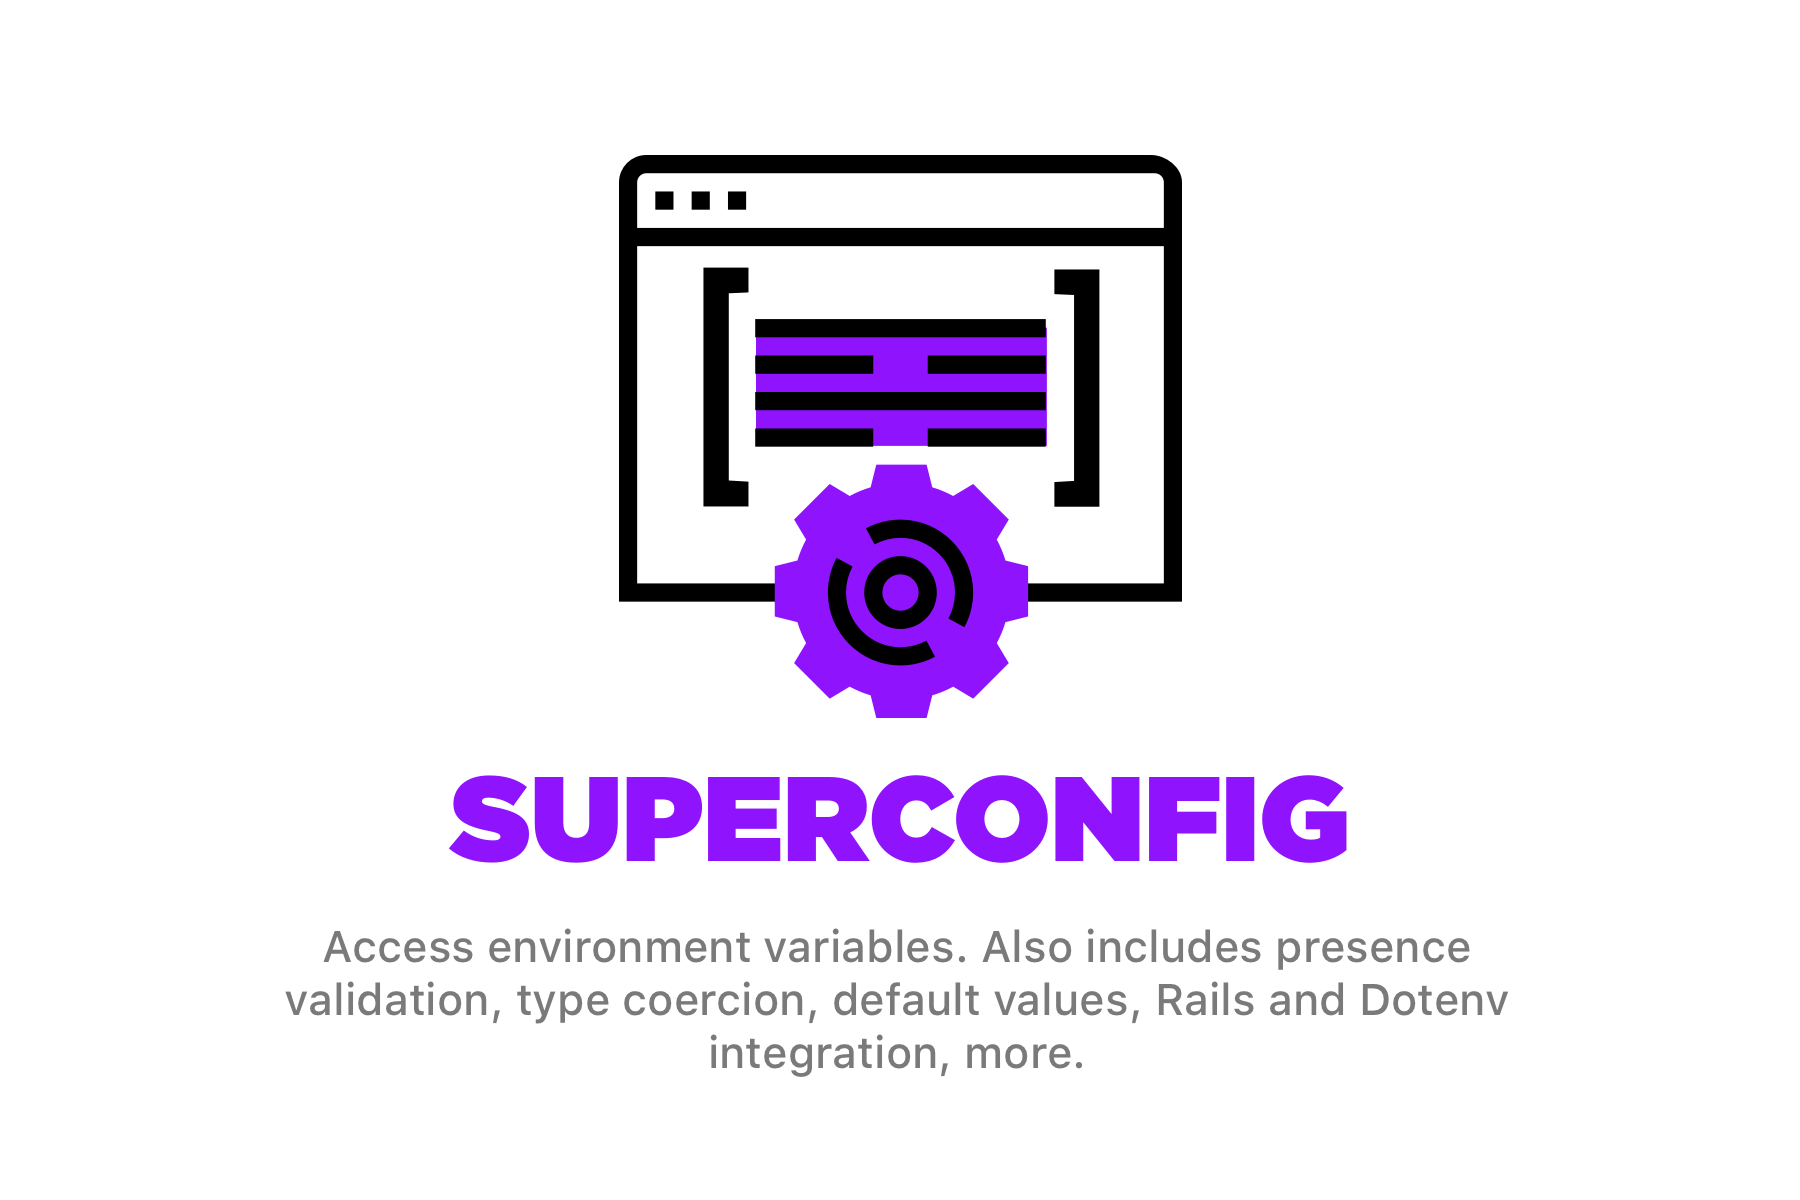 SuperConfig: Access environment variables. Also includes presence validation, type coercion and default values.